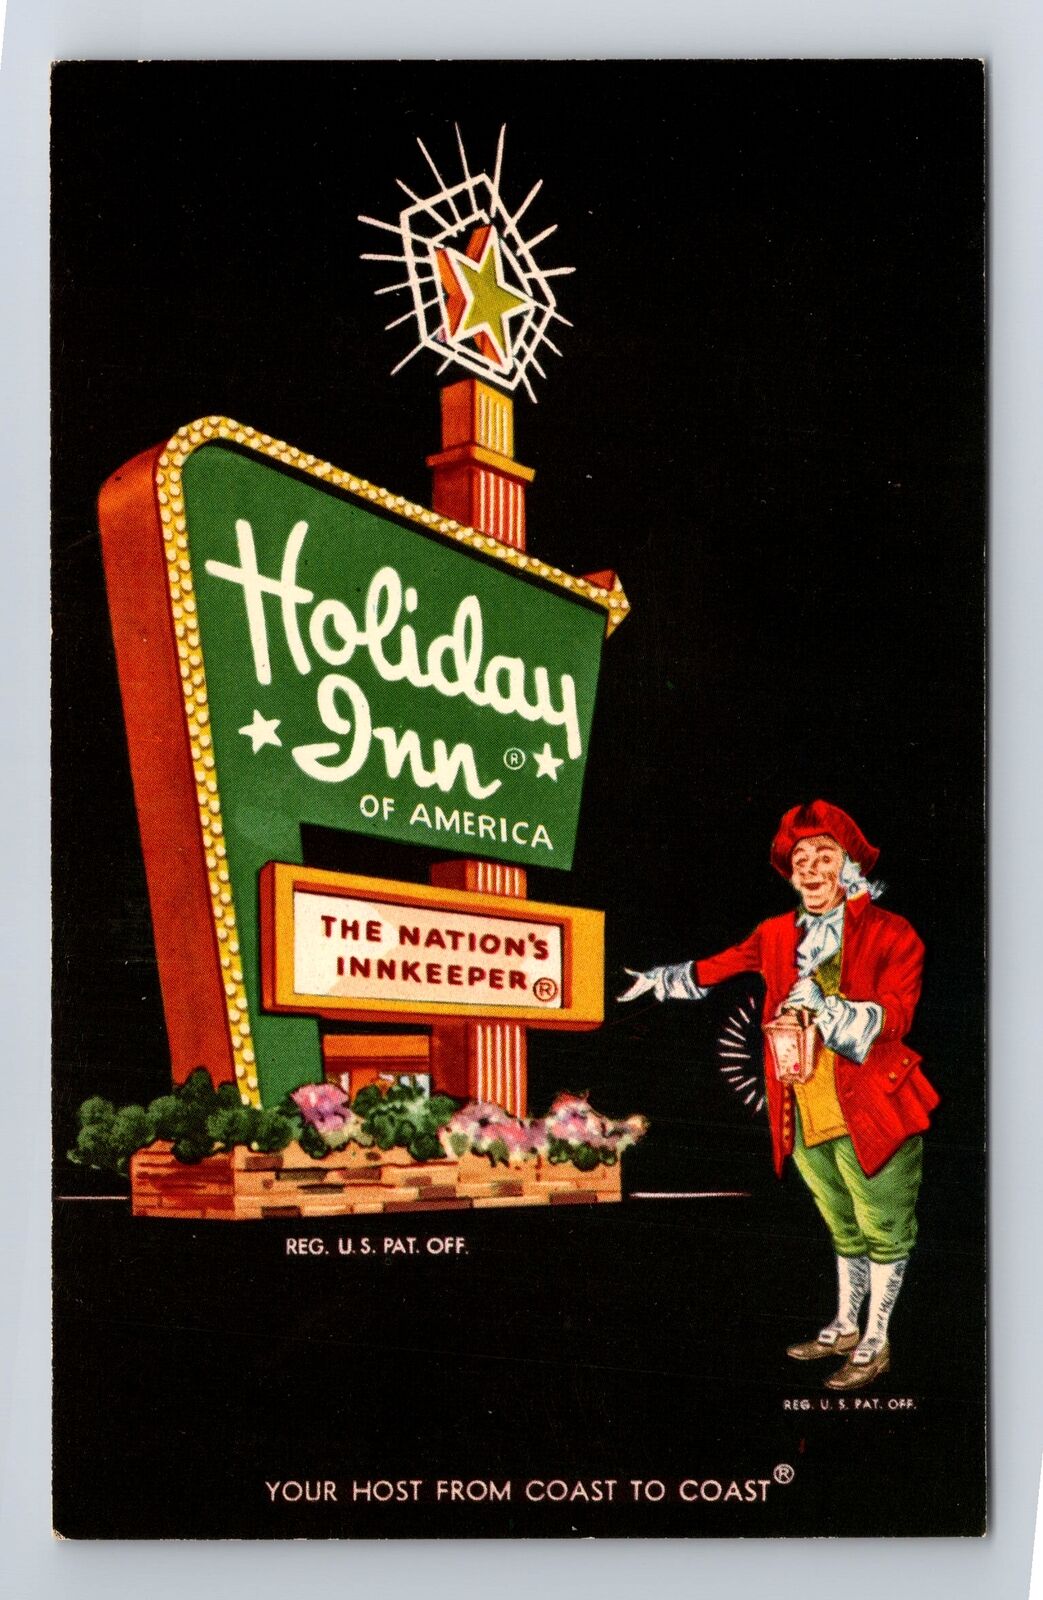 Hagerstown MD-Maryland, Holiday Inn, Advertising, Antique Vintage Postcard